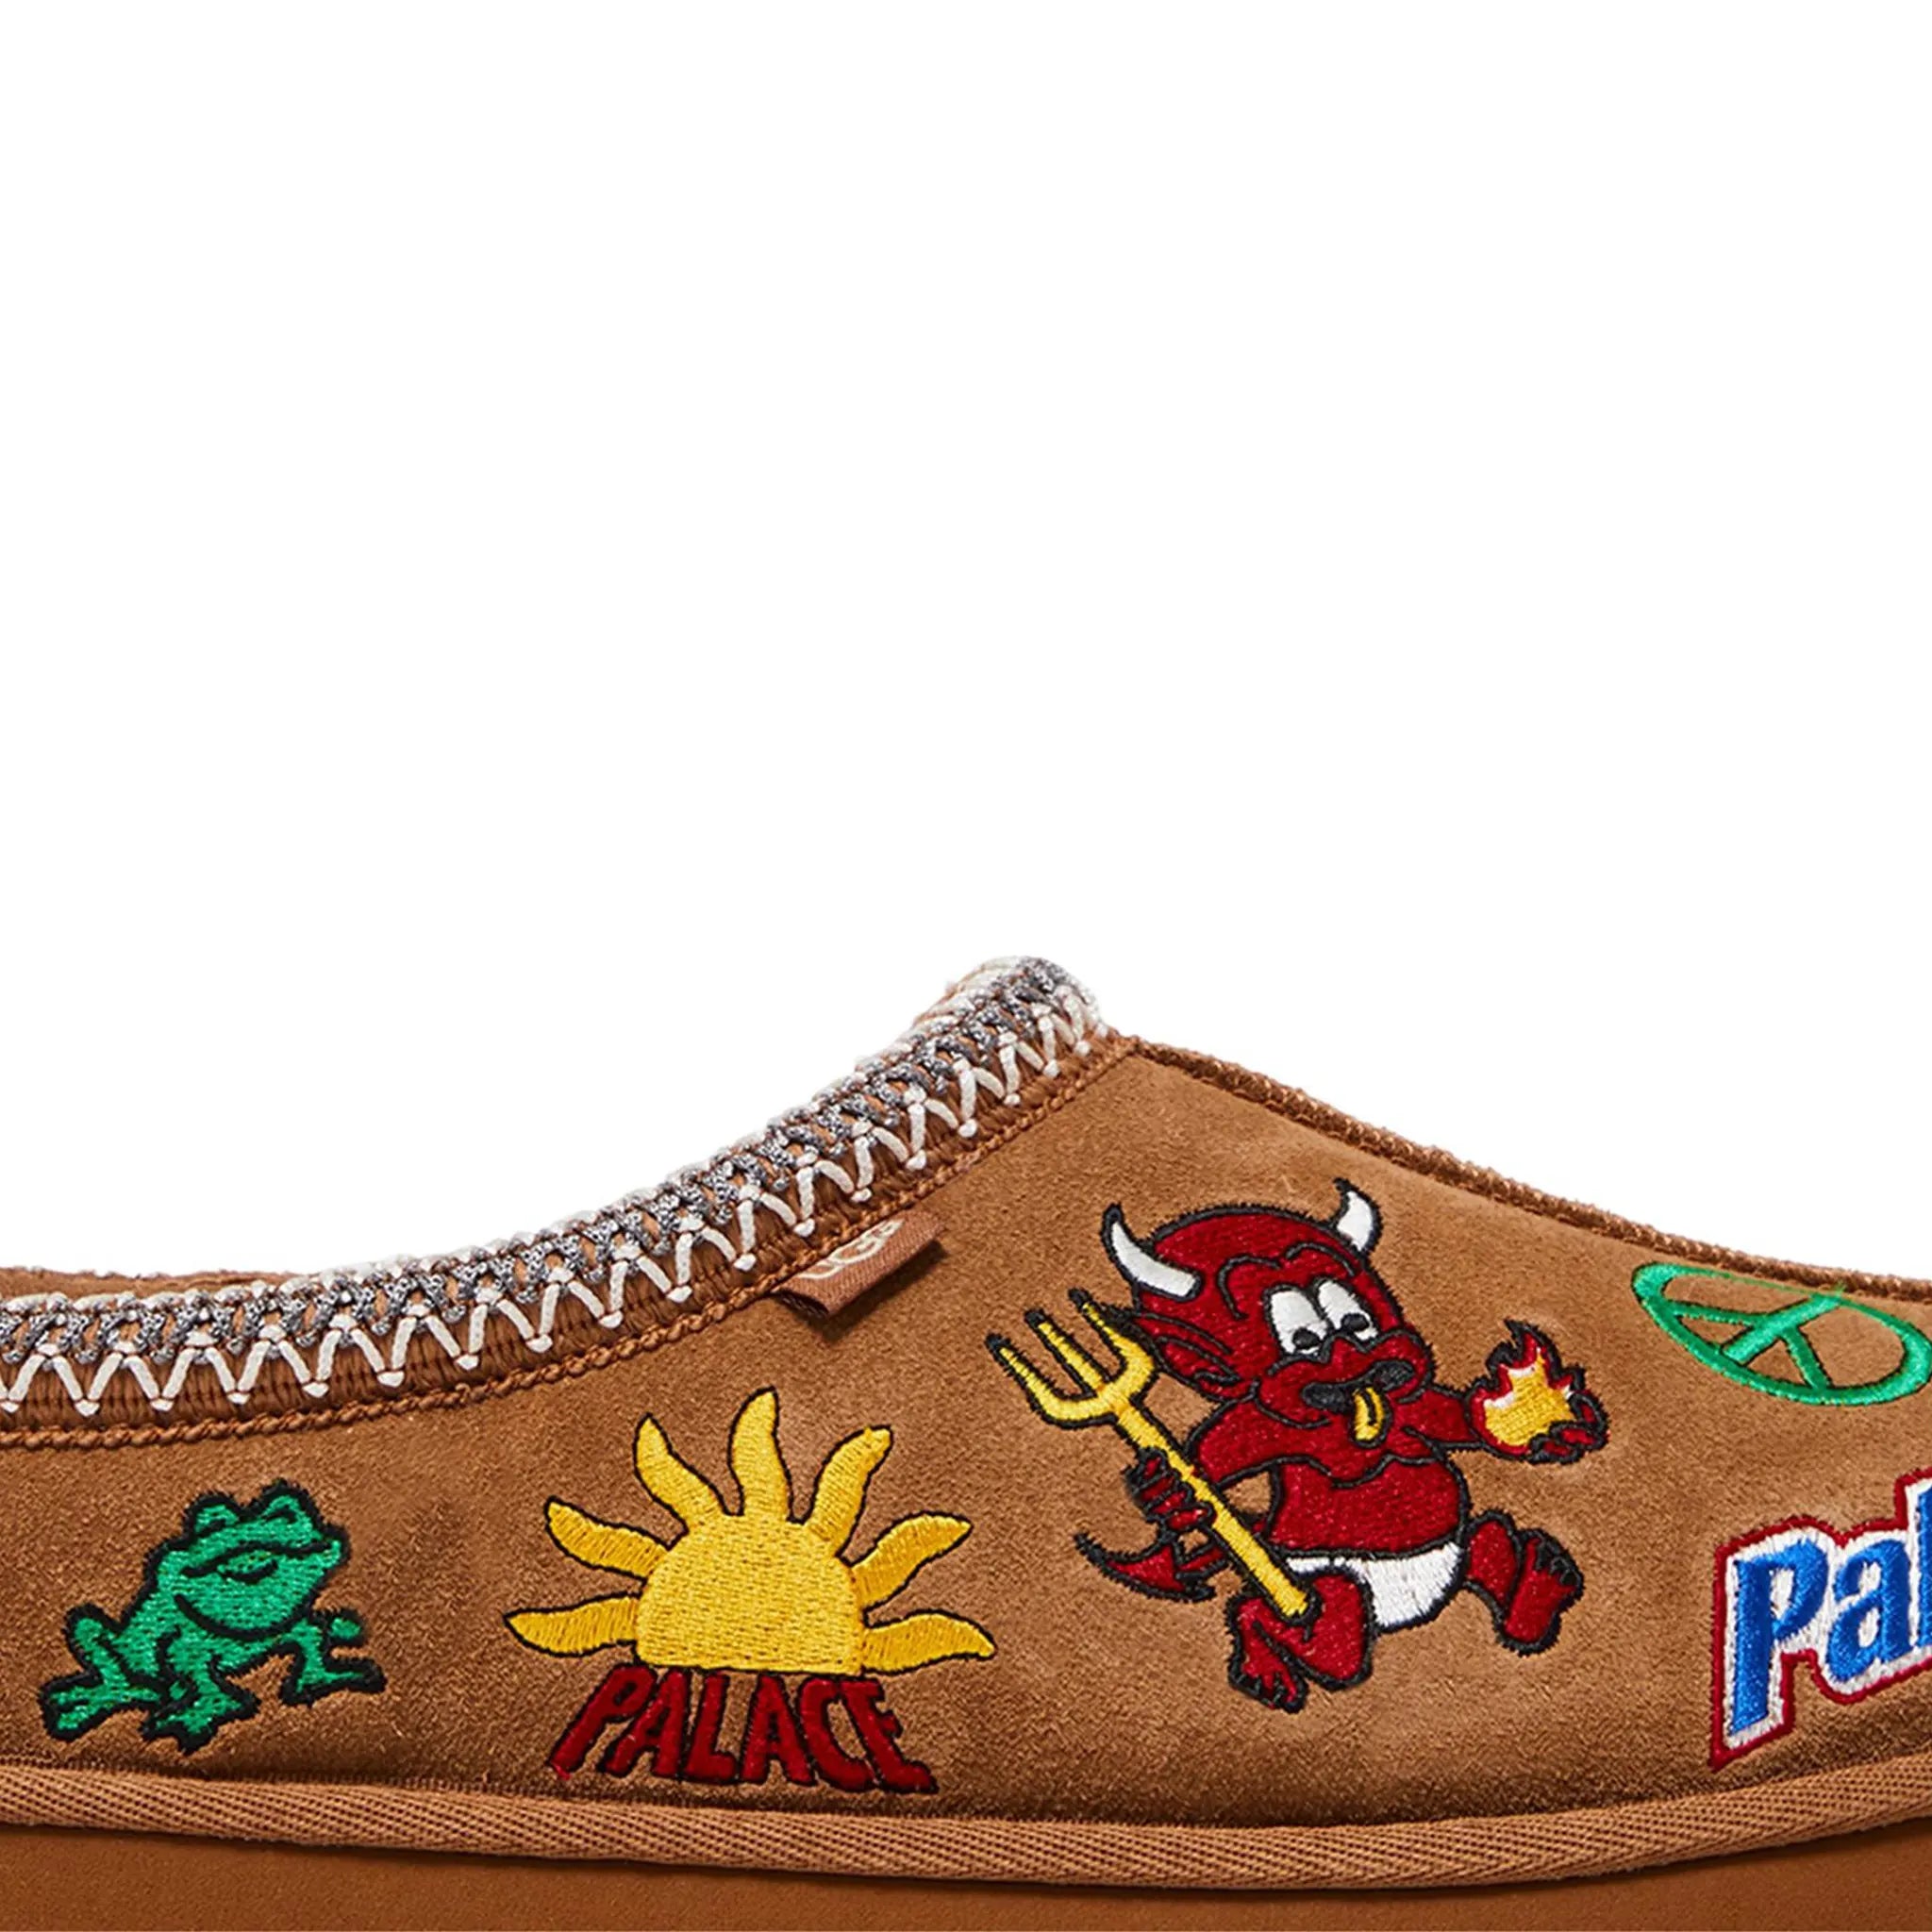 Detail view of Palace x UGG Tasman Chestnut Slippers 1157290-CHE